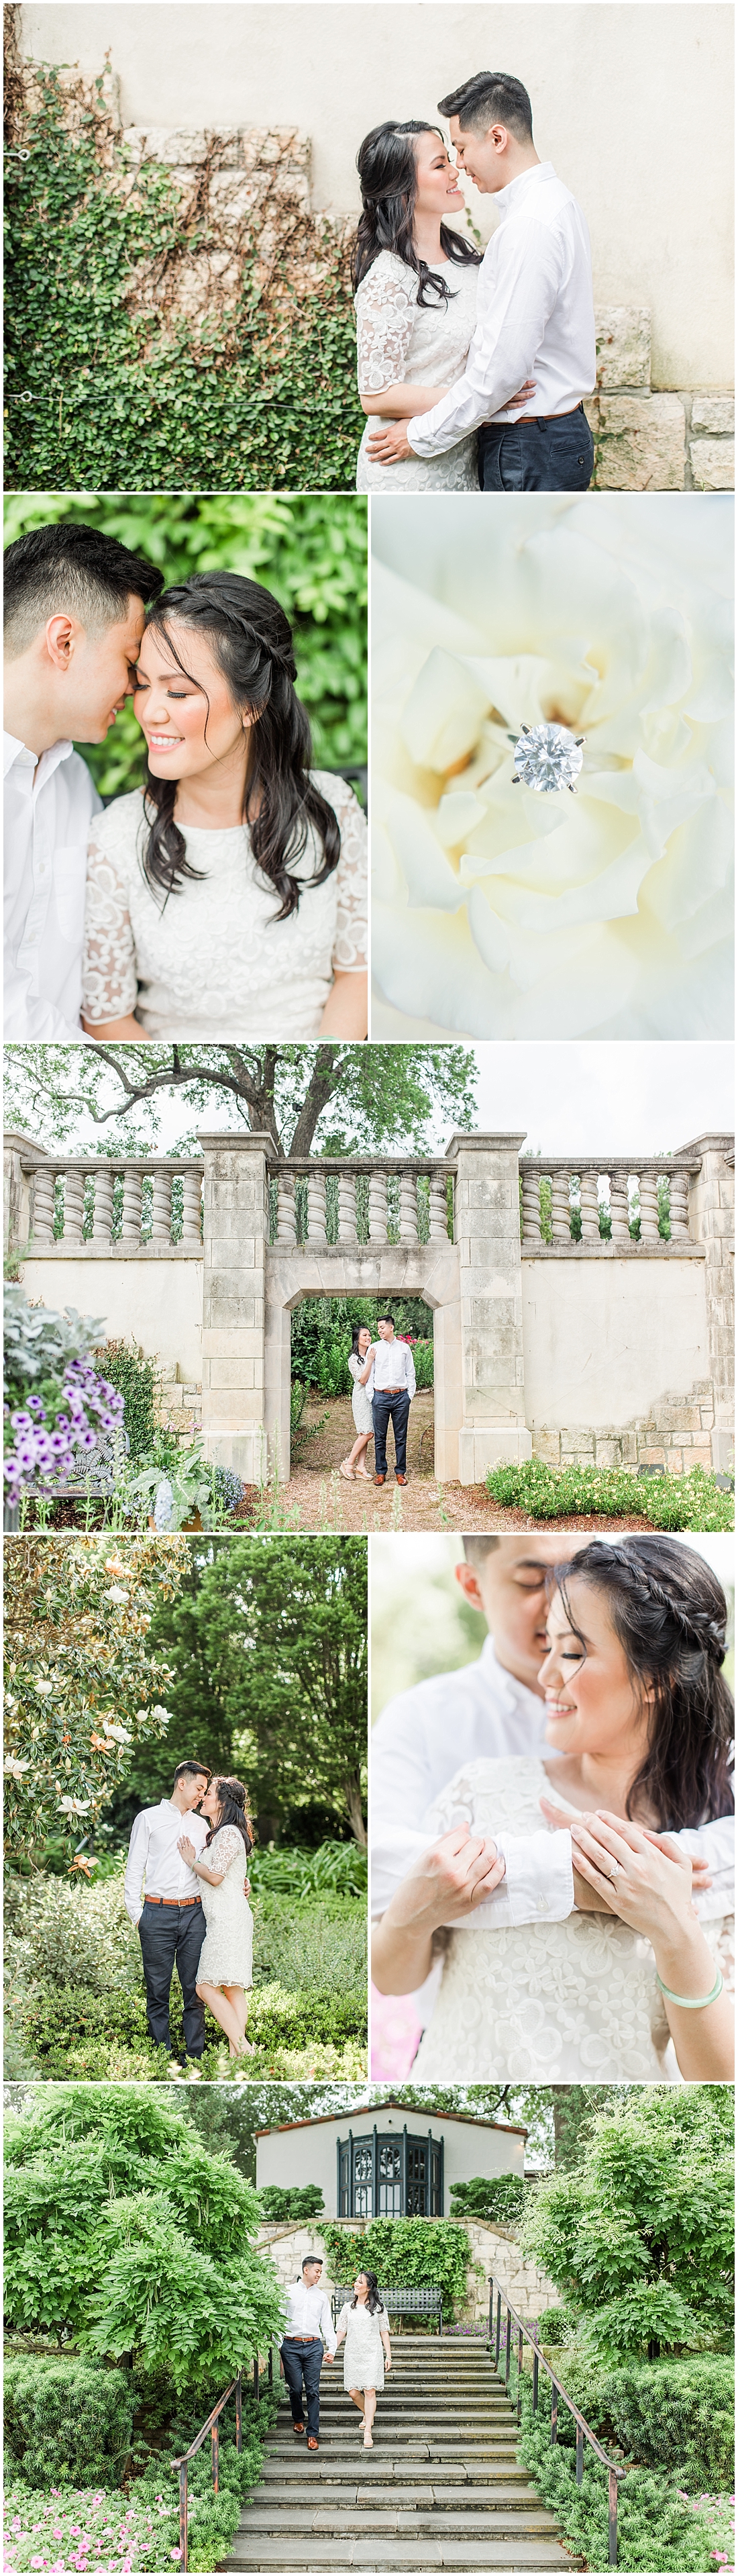 An Elegant Spring Engagement Session at the Dallas Arboretum and Botanical Gardens by Allison Jeffers Wedding Photography 0062